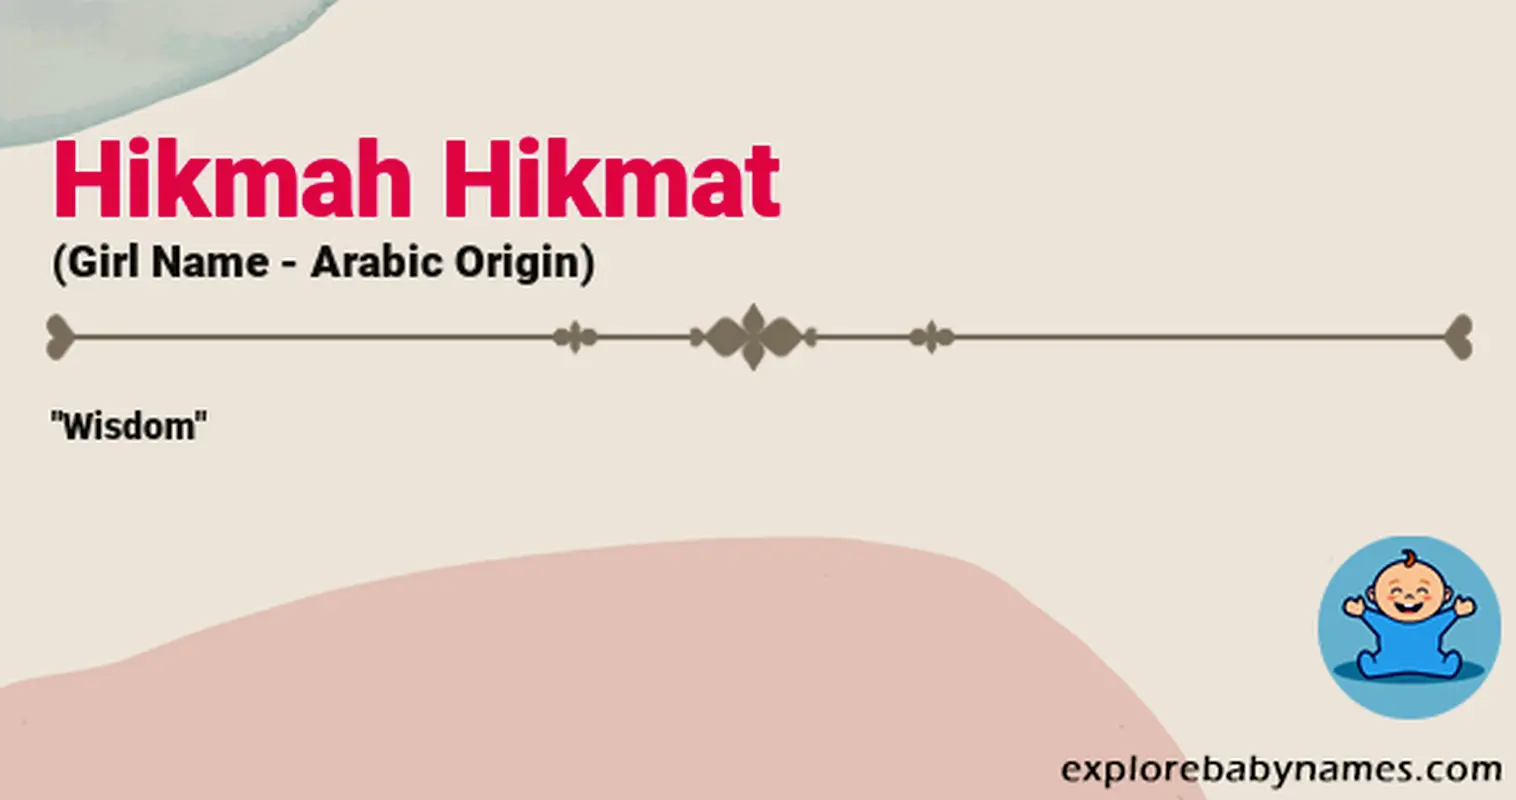 Meaning of Hikmah Hikmat